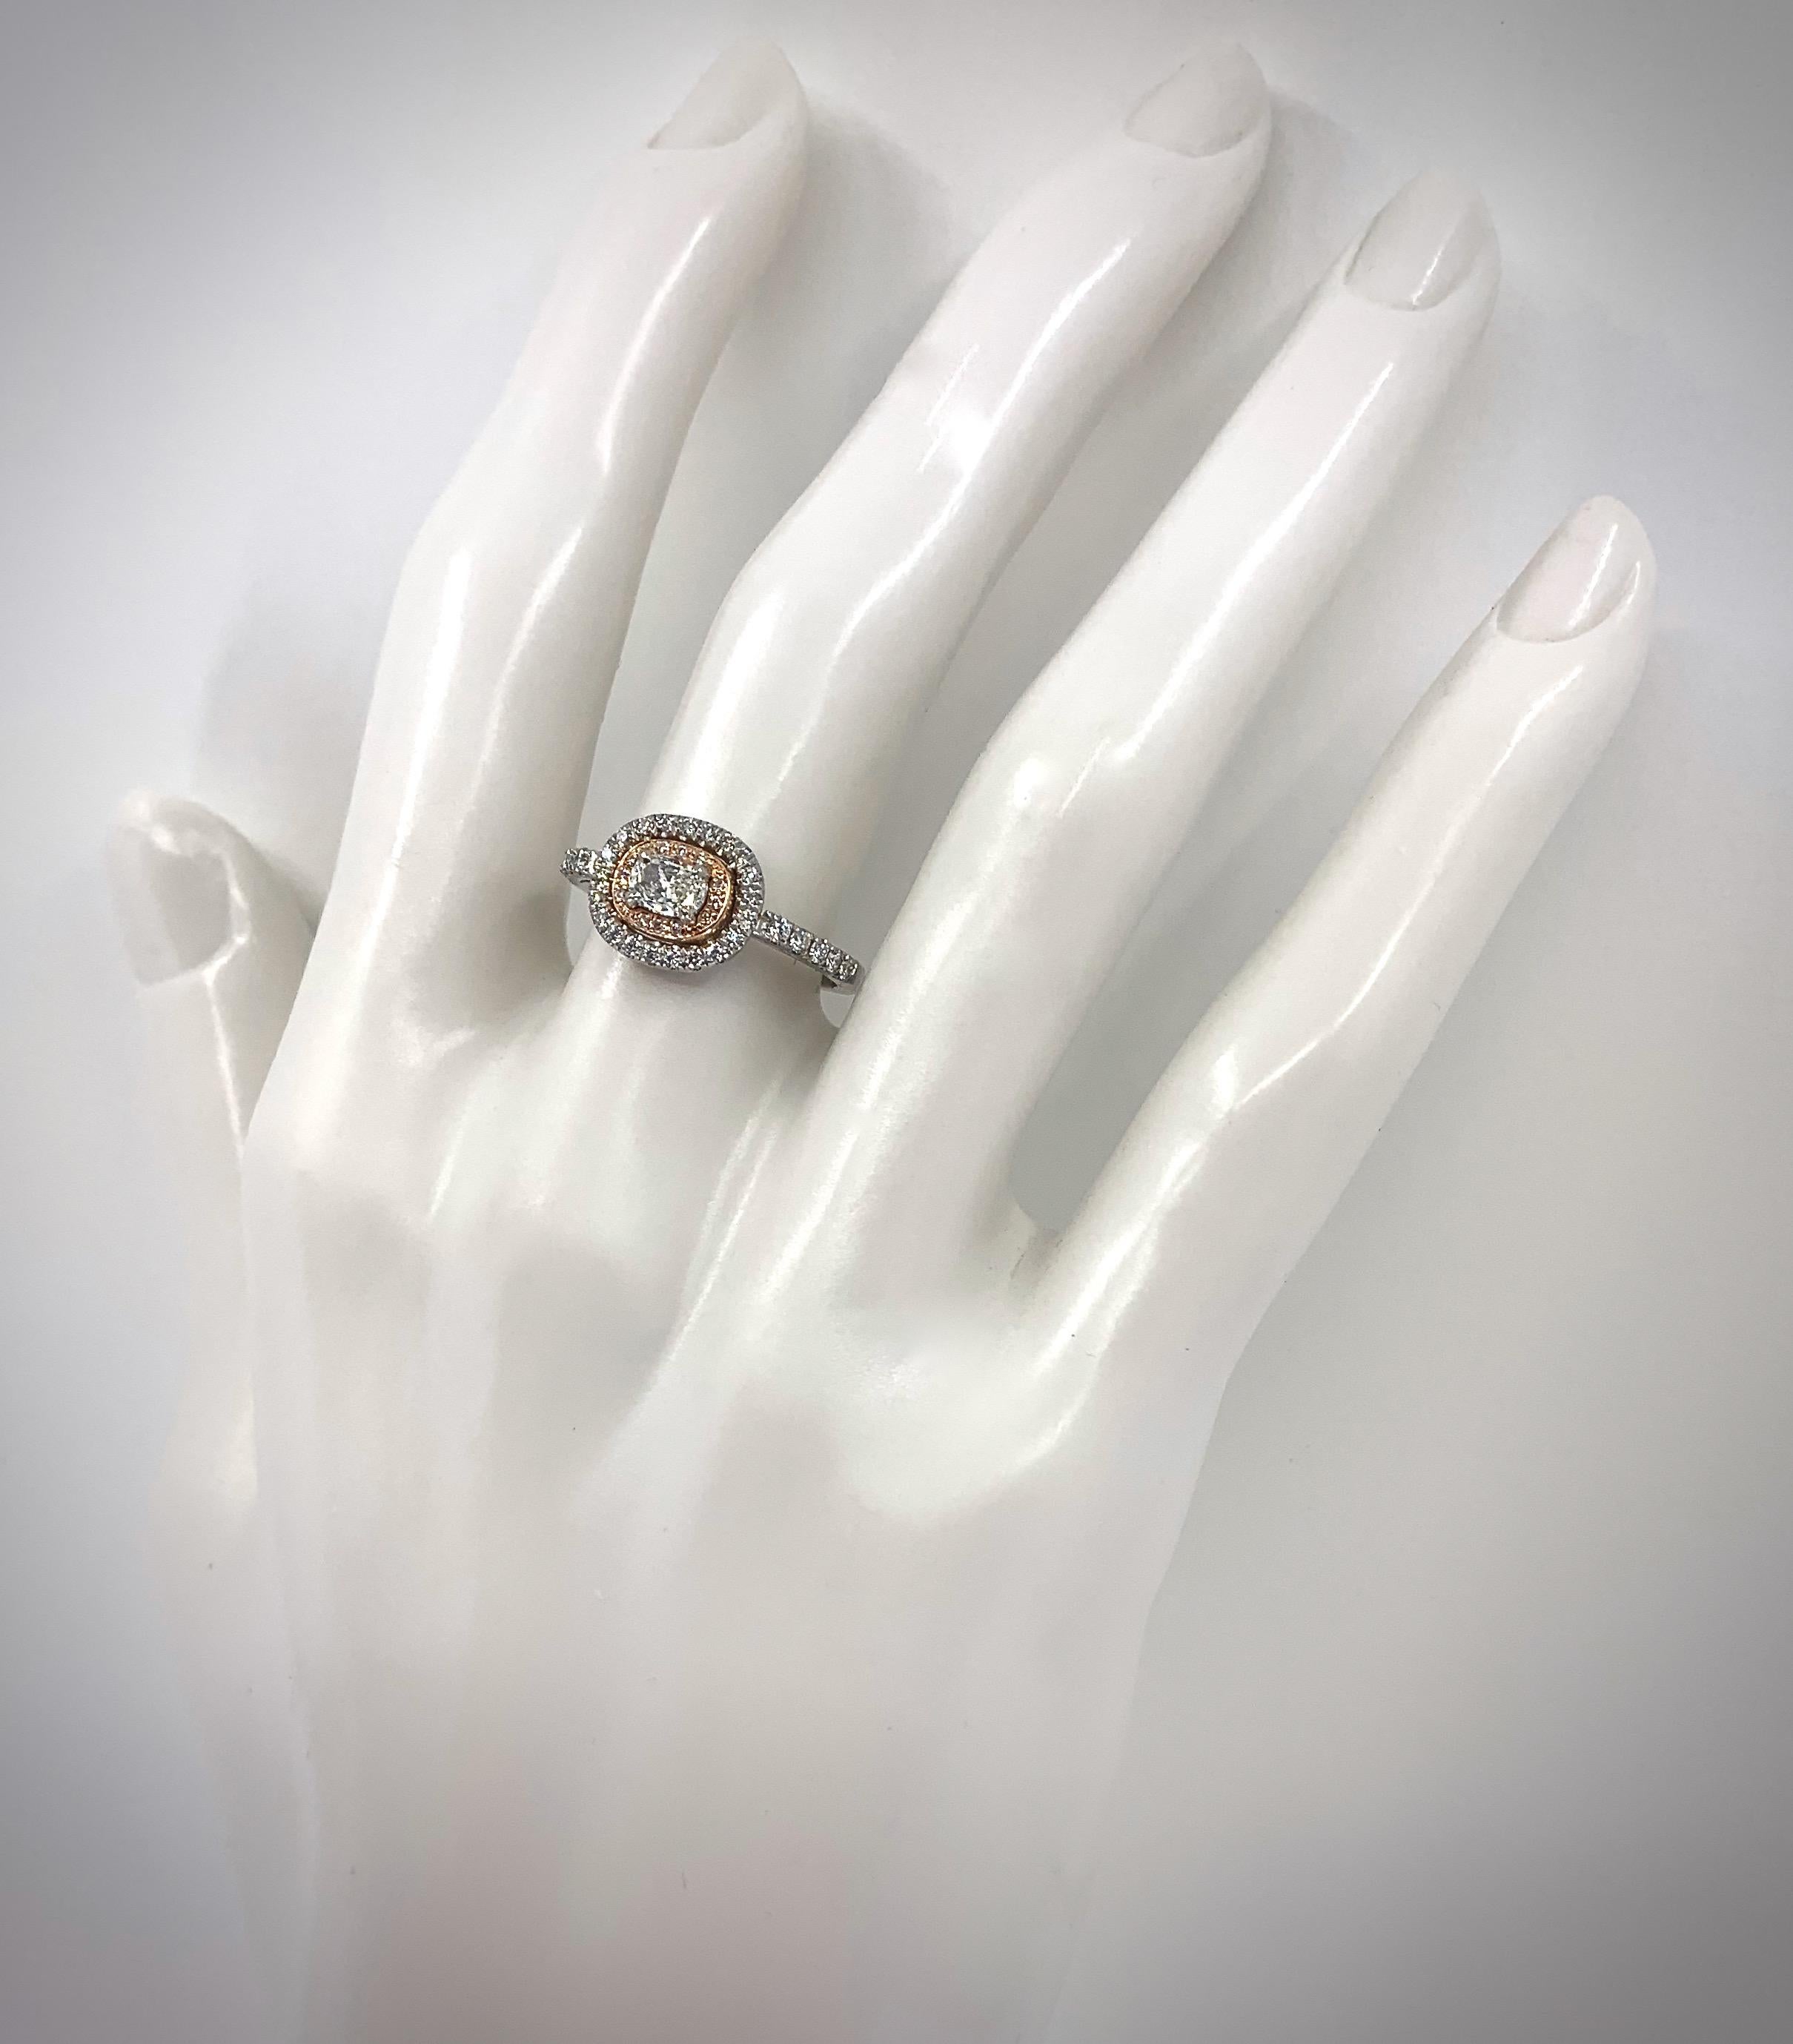 The stone shape, the rose gold contrast and the horizontal orientation are great design elements in this lovely little halo ring by Eytan Brandes.

In subtle elevations, a cushion-cut rectangle diamond is prong-set within concentric halos of rose